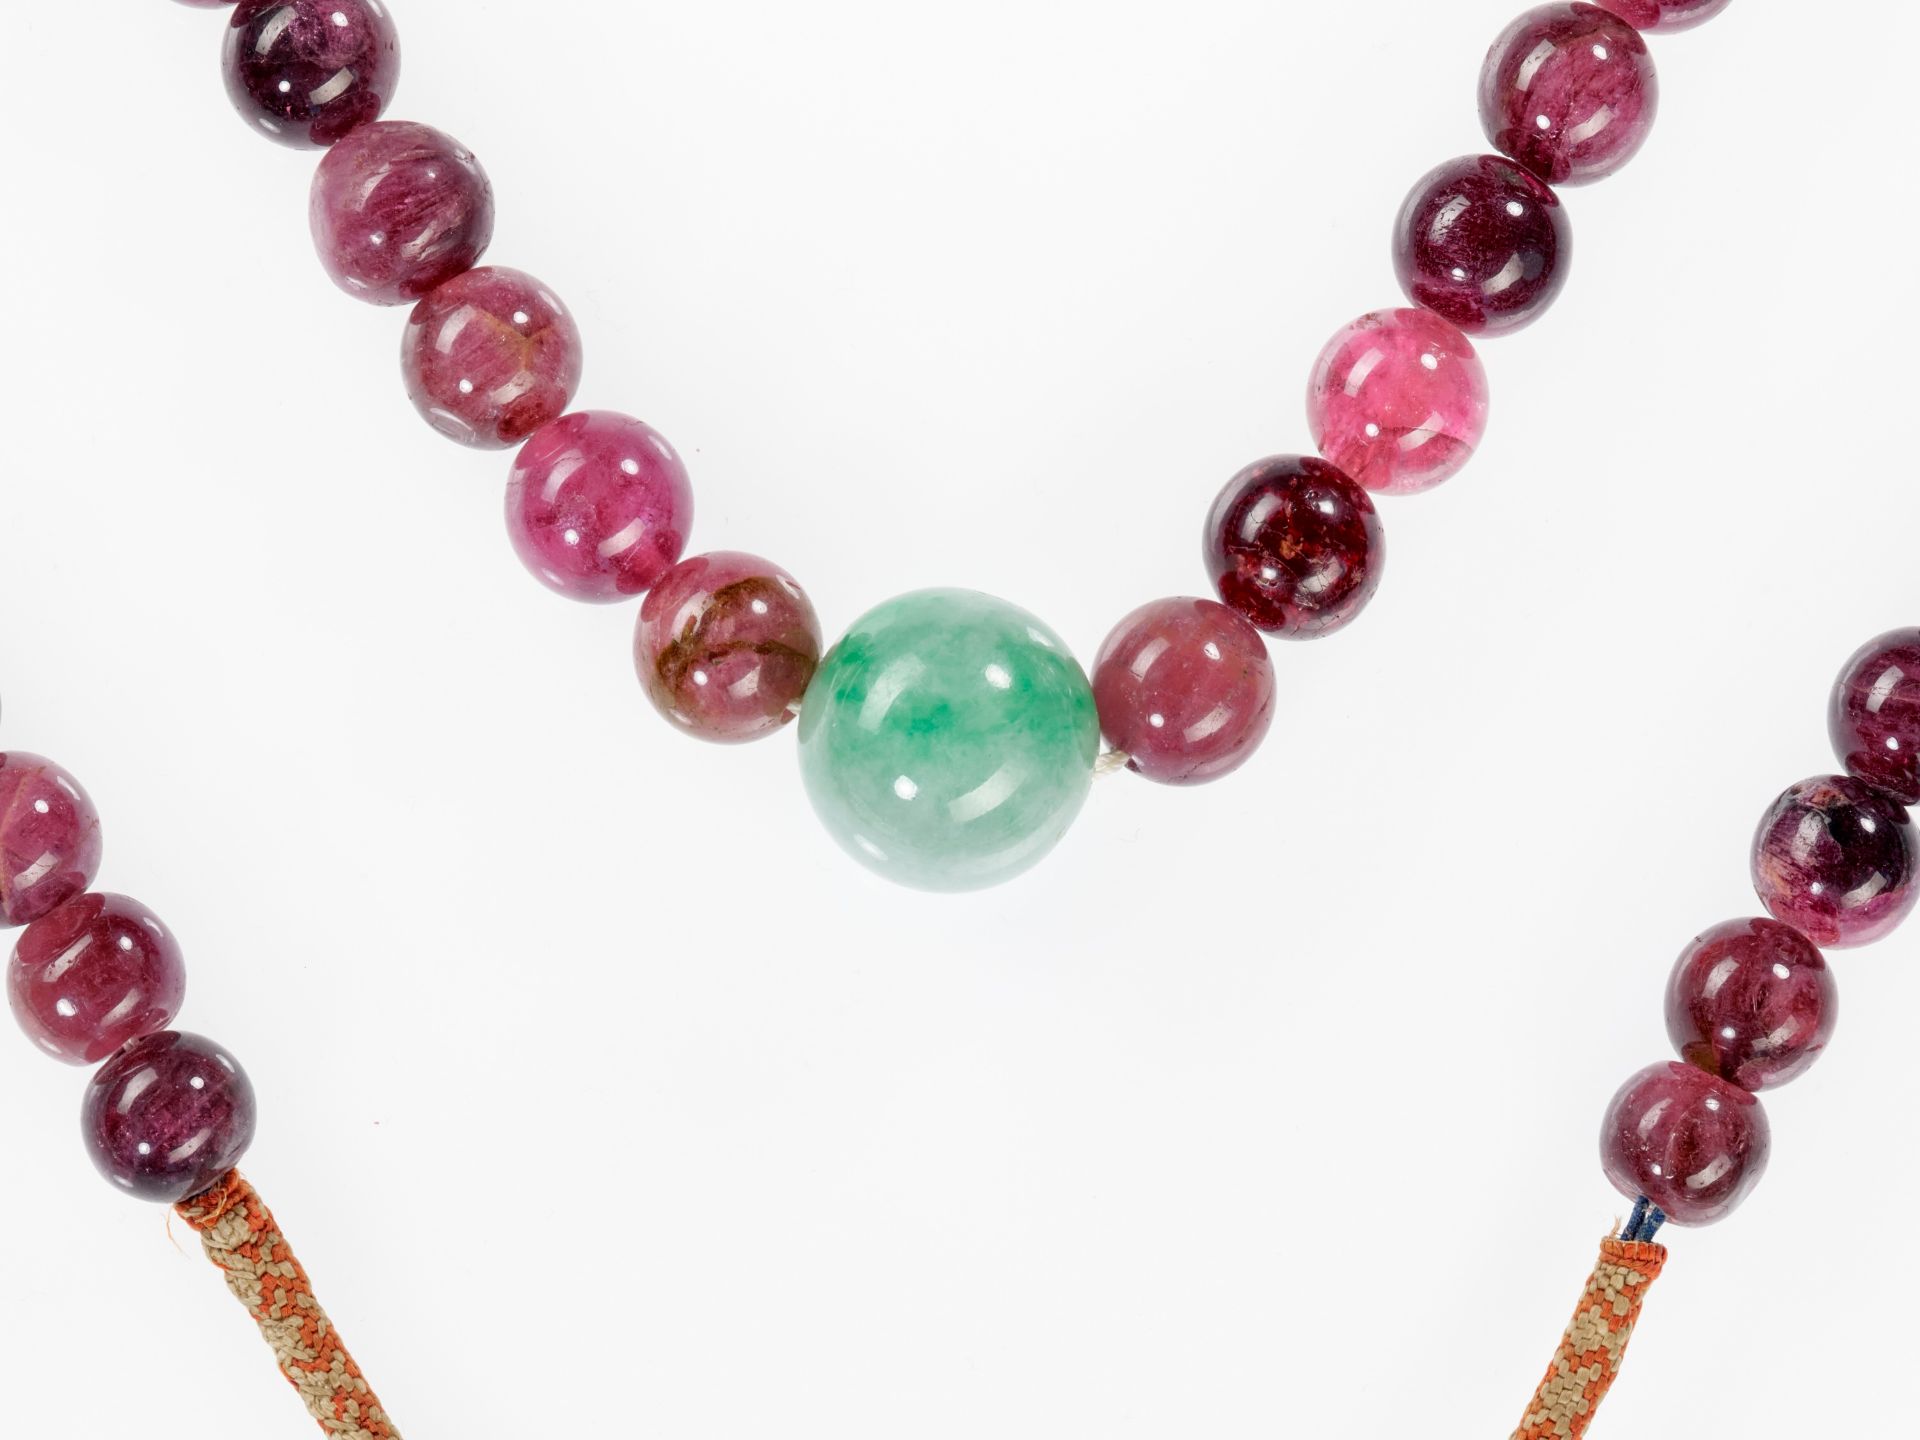 AN IMPRESSIVE TOURMALINE COURT NECKLACE, CHAOZHU, MID-QING - Image 11 of 14